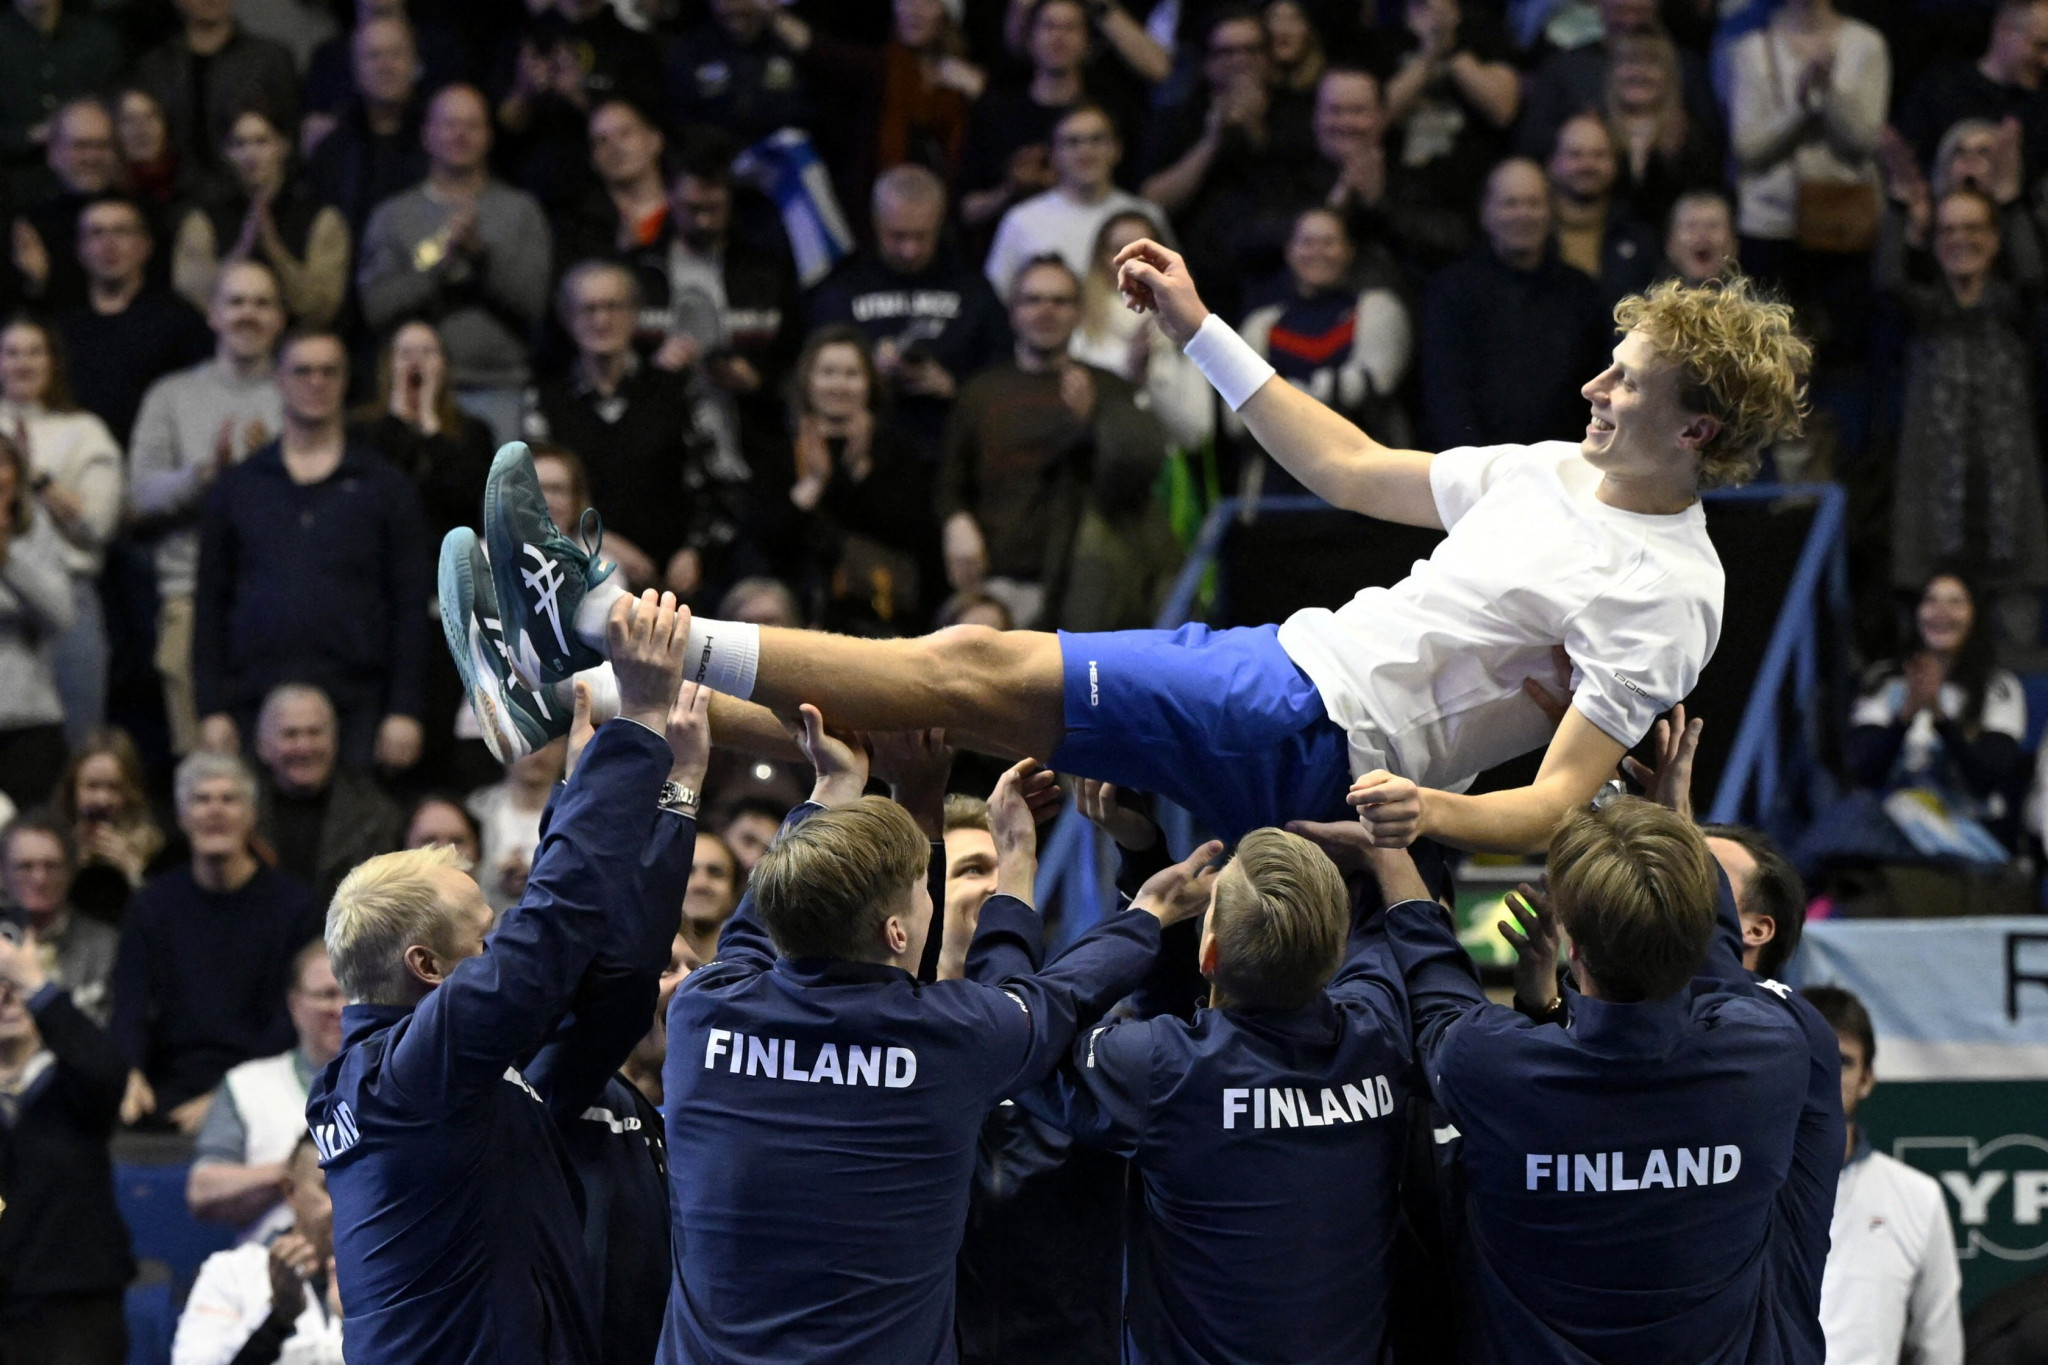 Emil Ruusuvuori, top, starred for Finland as they reached the Davis Cup Finals for the first time against Argentina ©Getty Images